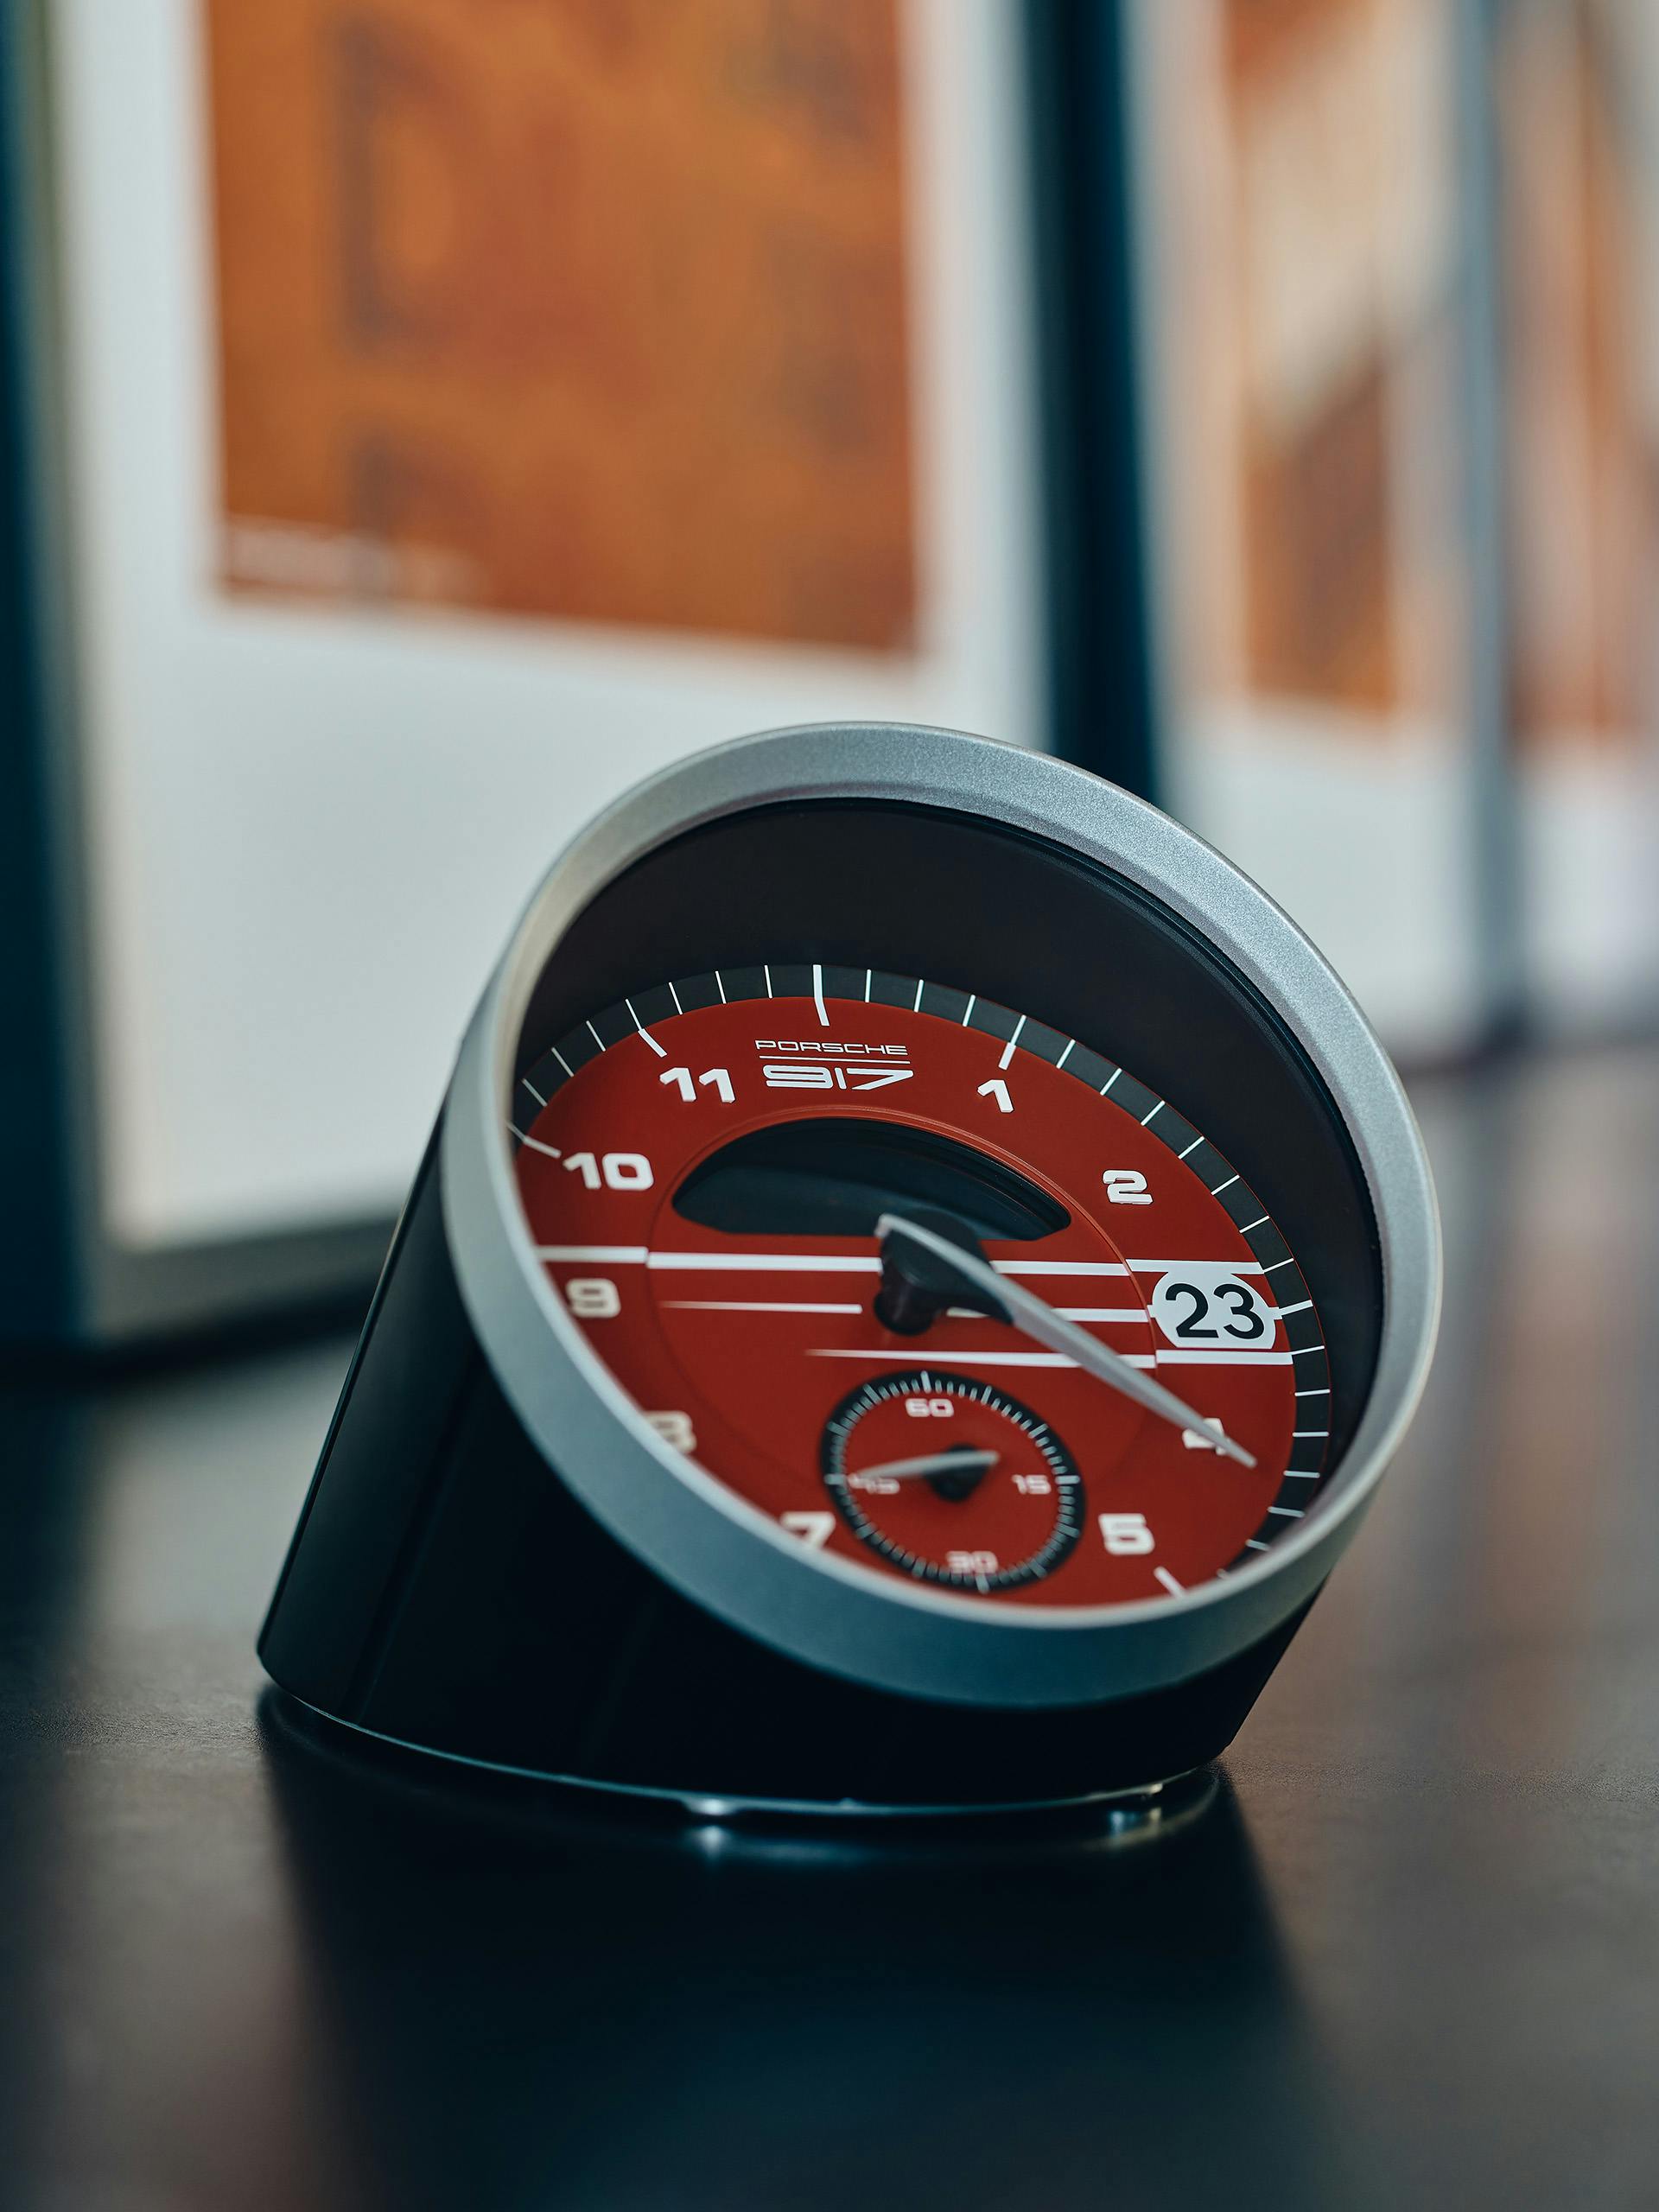 Pictured is a table clock from Porsche.